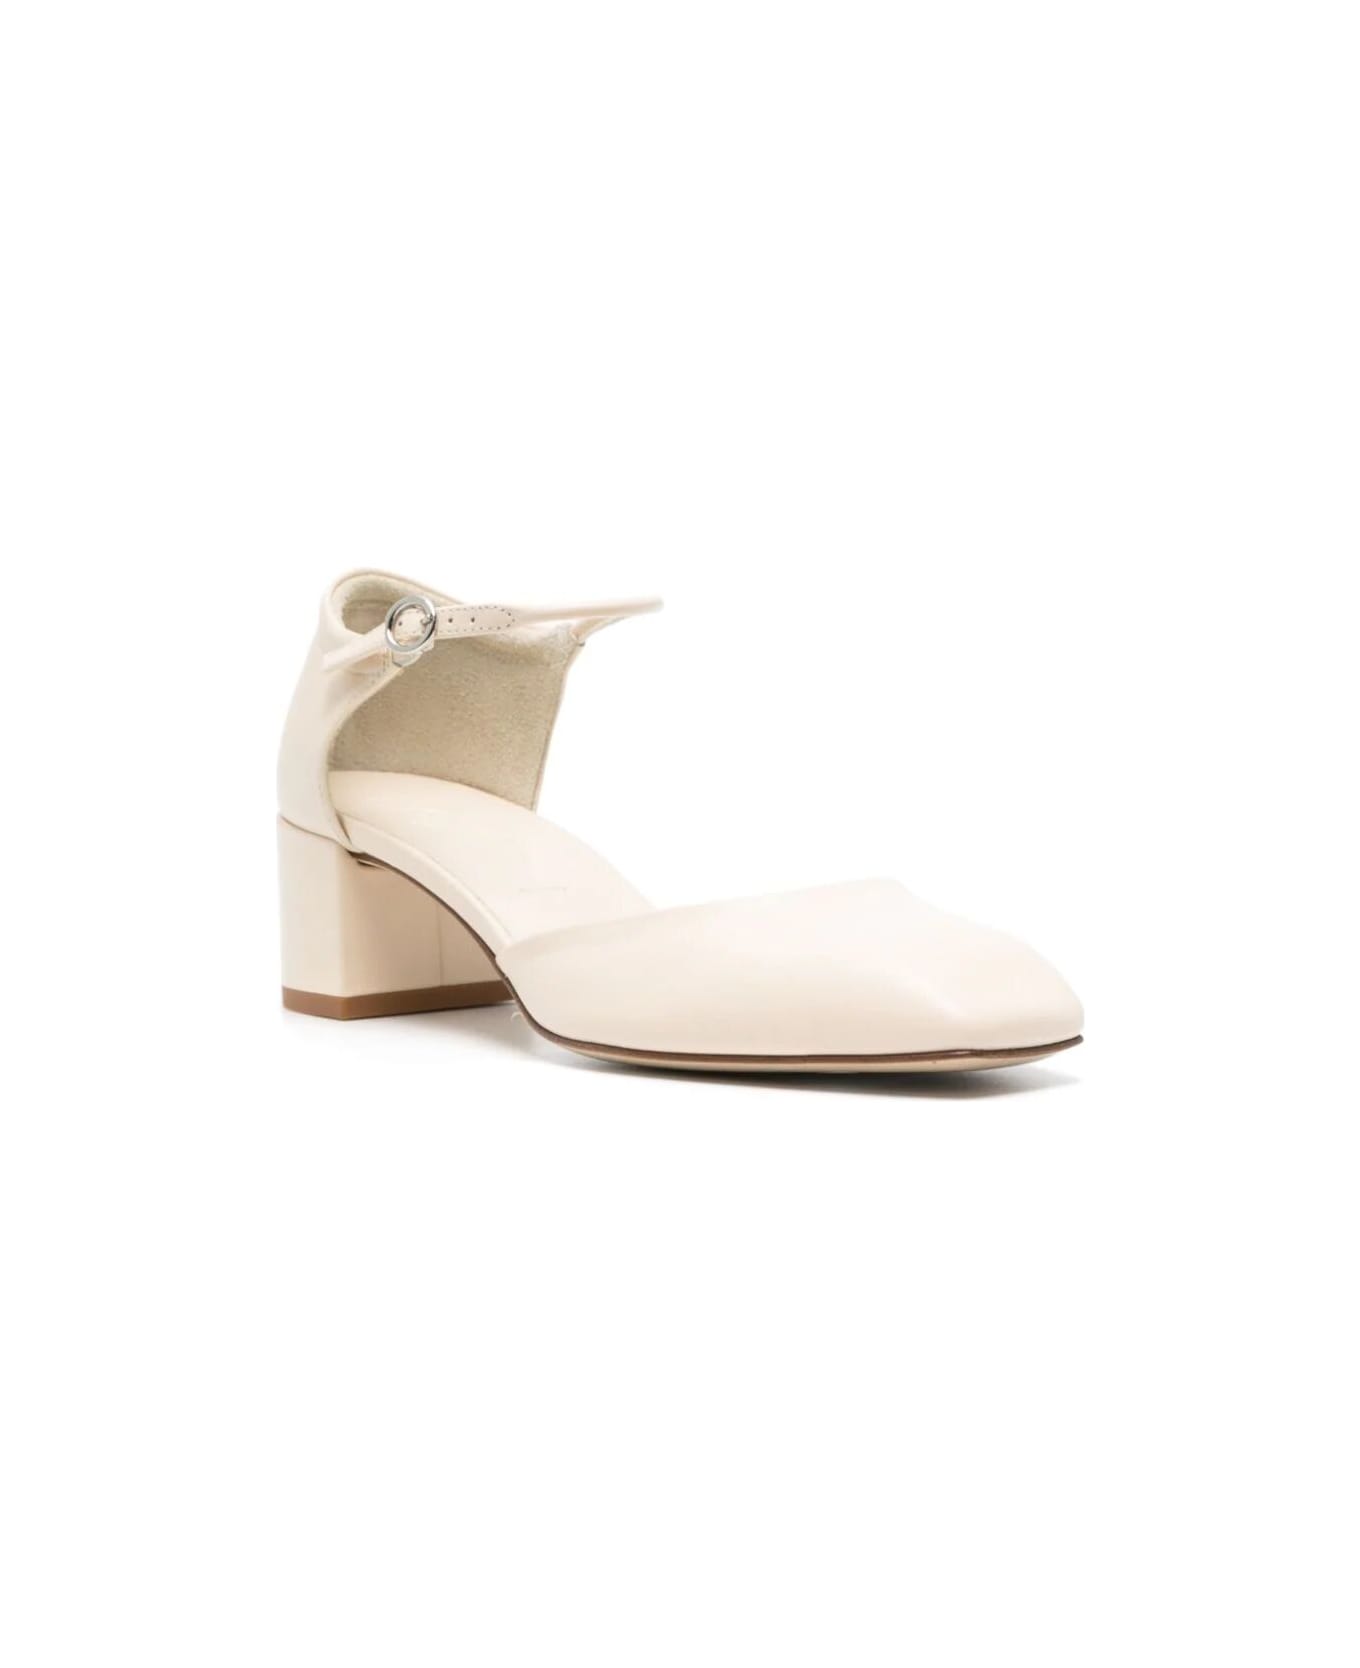 aeyde Magda Nappa Leather Creamy Shoes - Creamy